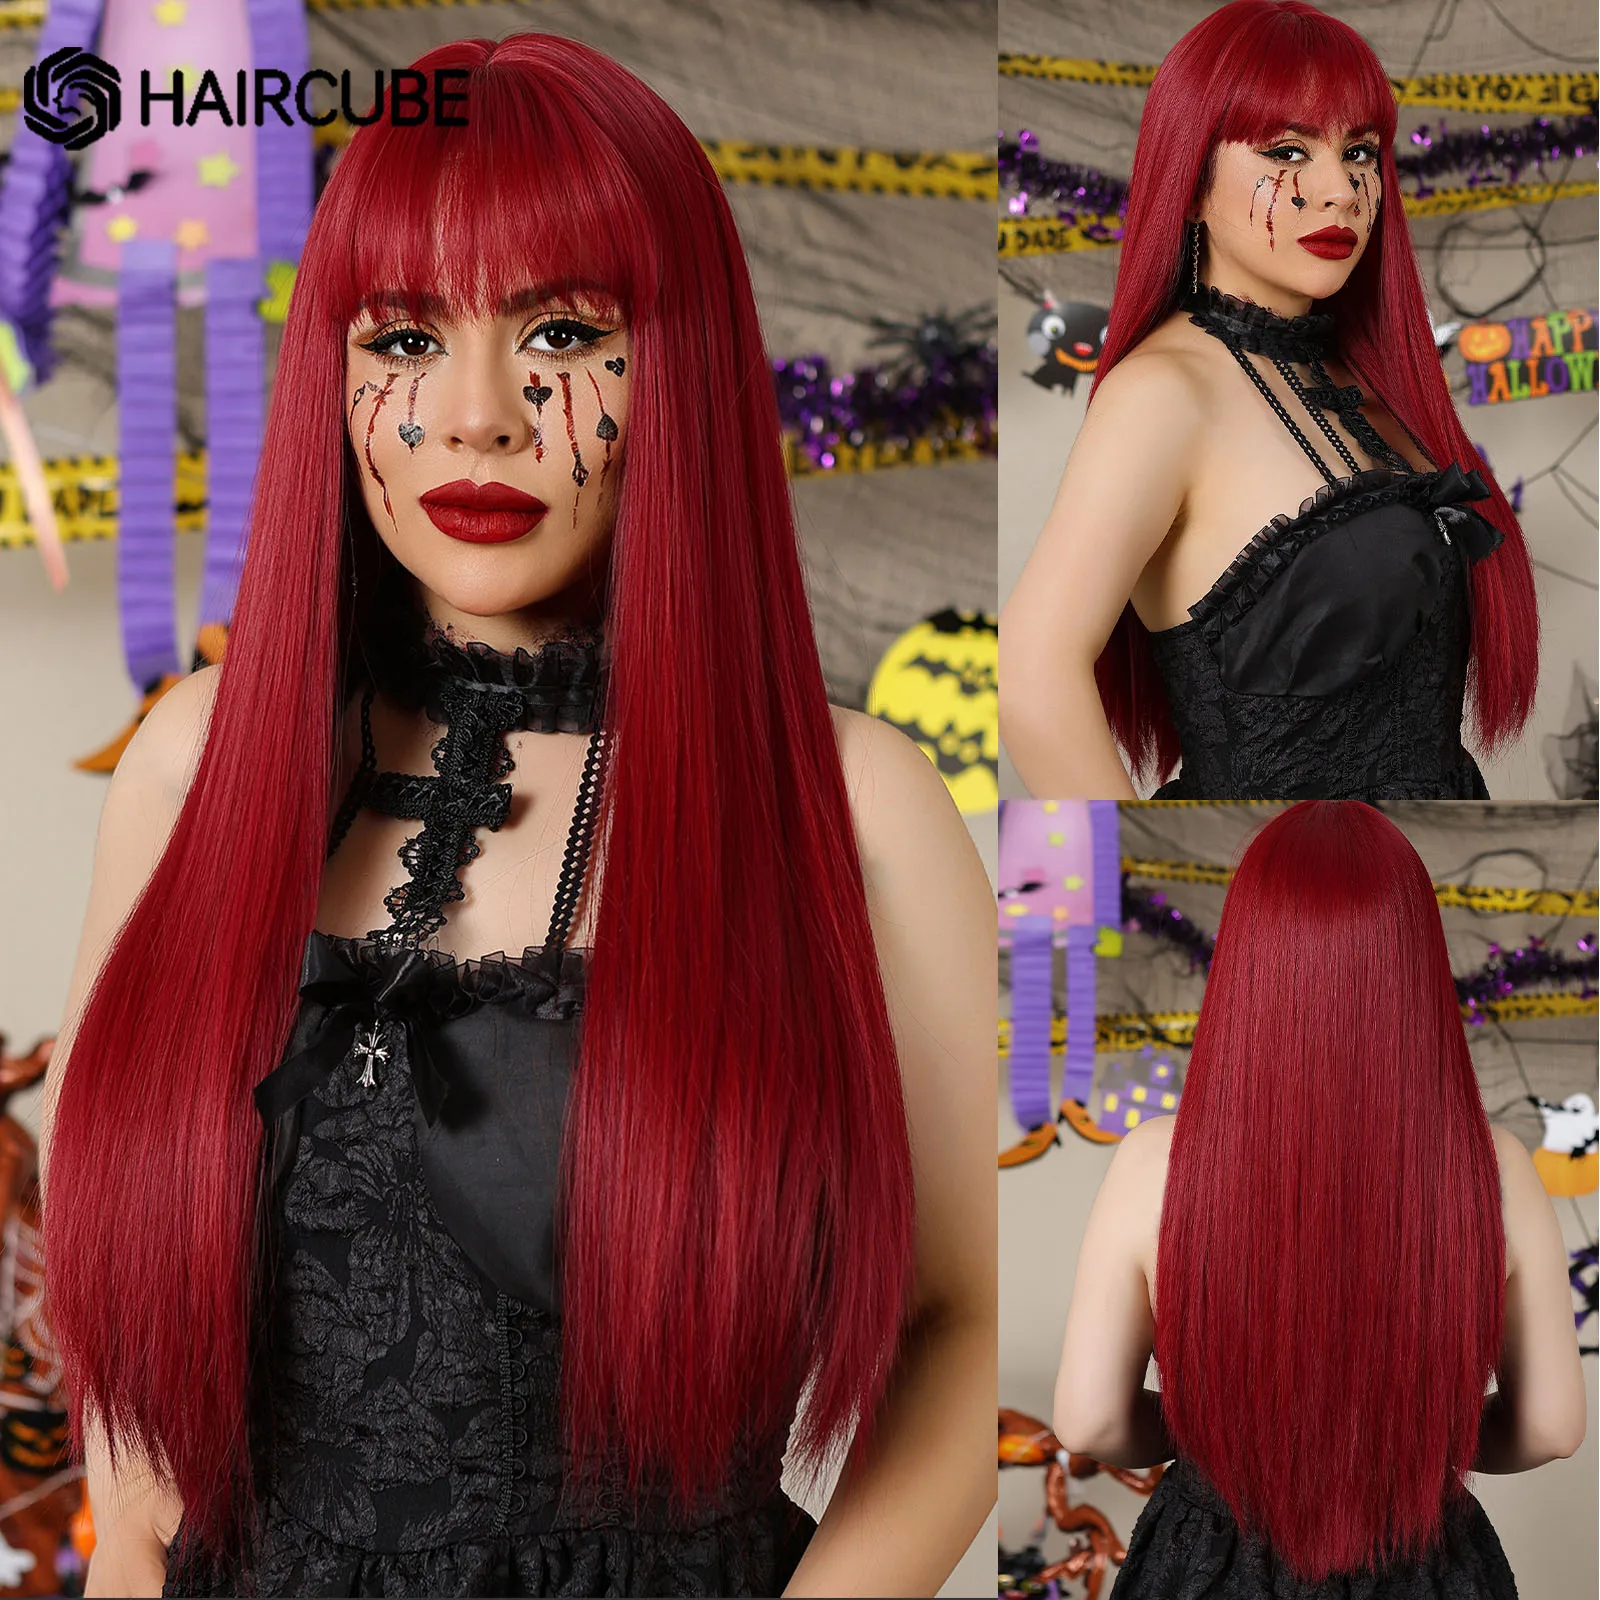 HAIRCUBE Long straight Cosplay Synthetic Wigs Wine Red Fake Hair Wigs for Wom - $24.42+